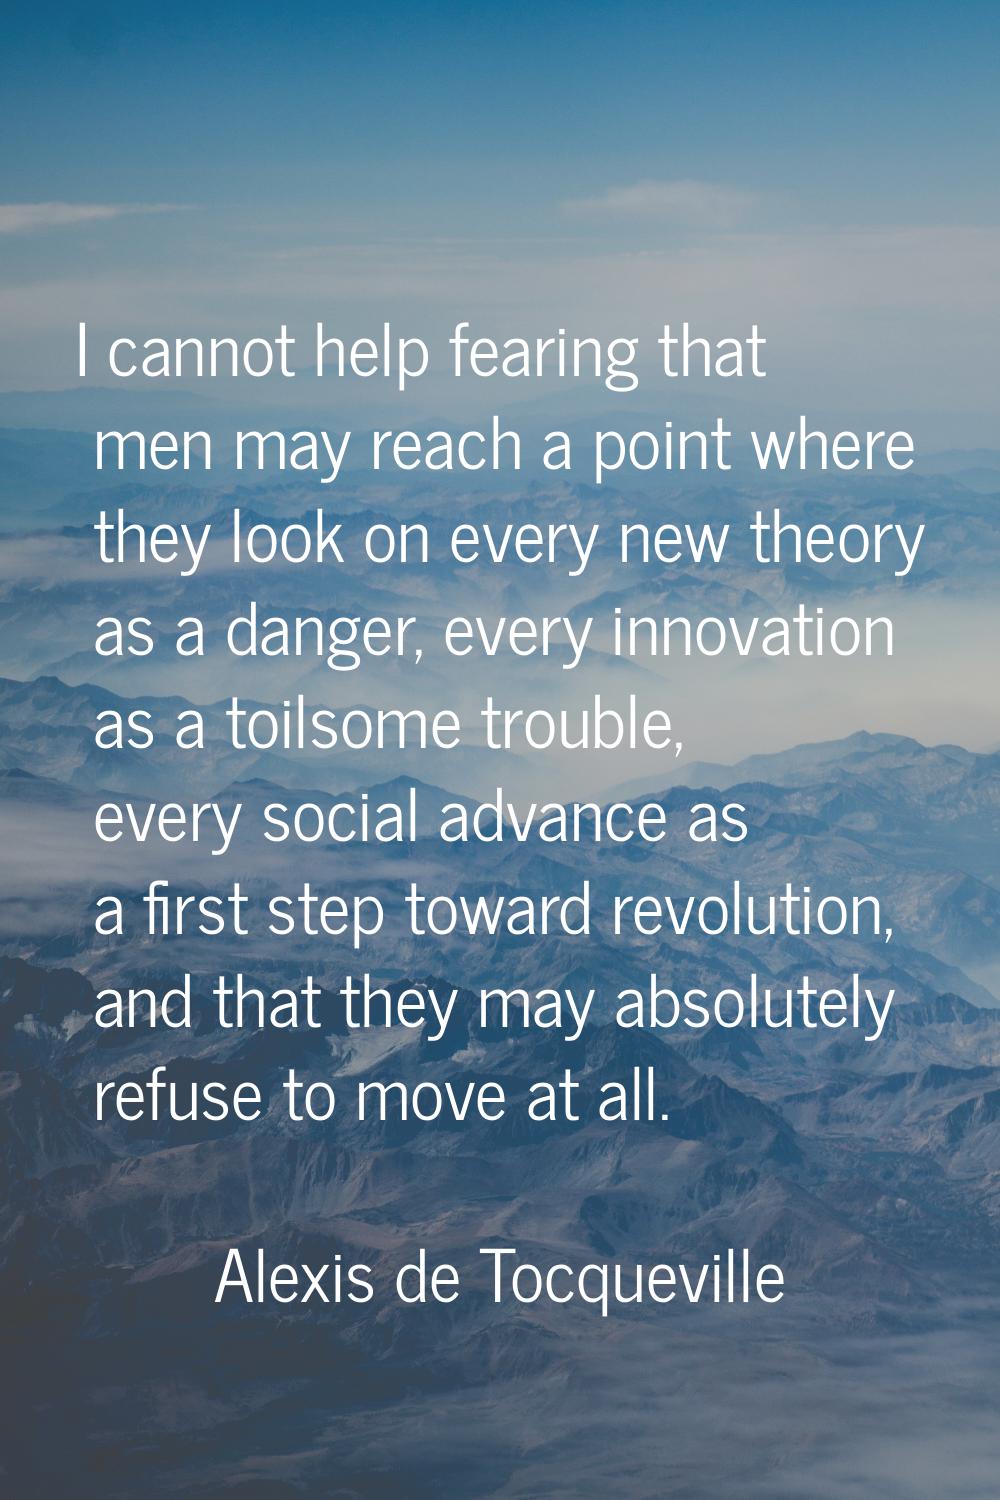 I cannot help fearing that men may reach a point where they look on every new theory as a danger, e